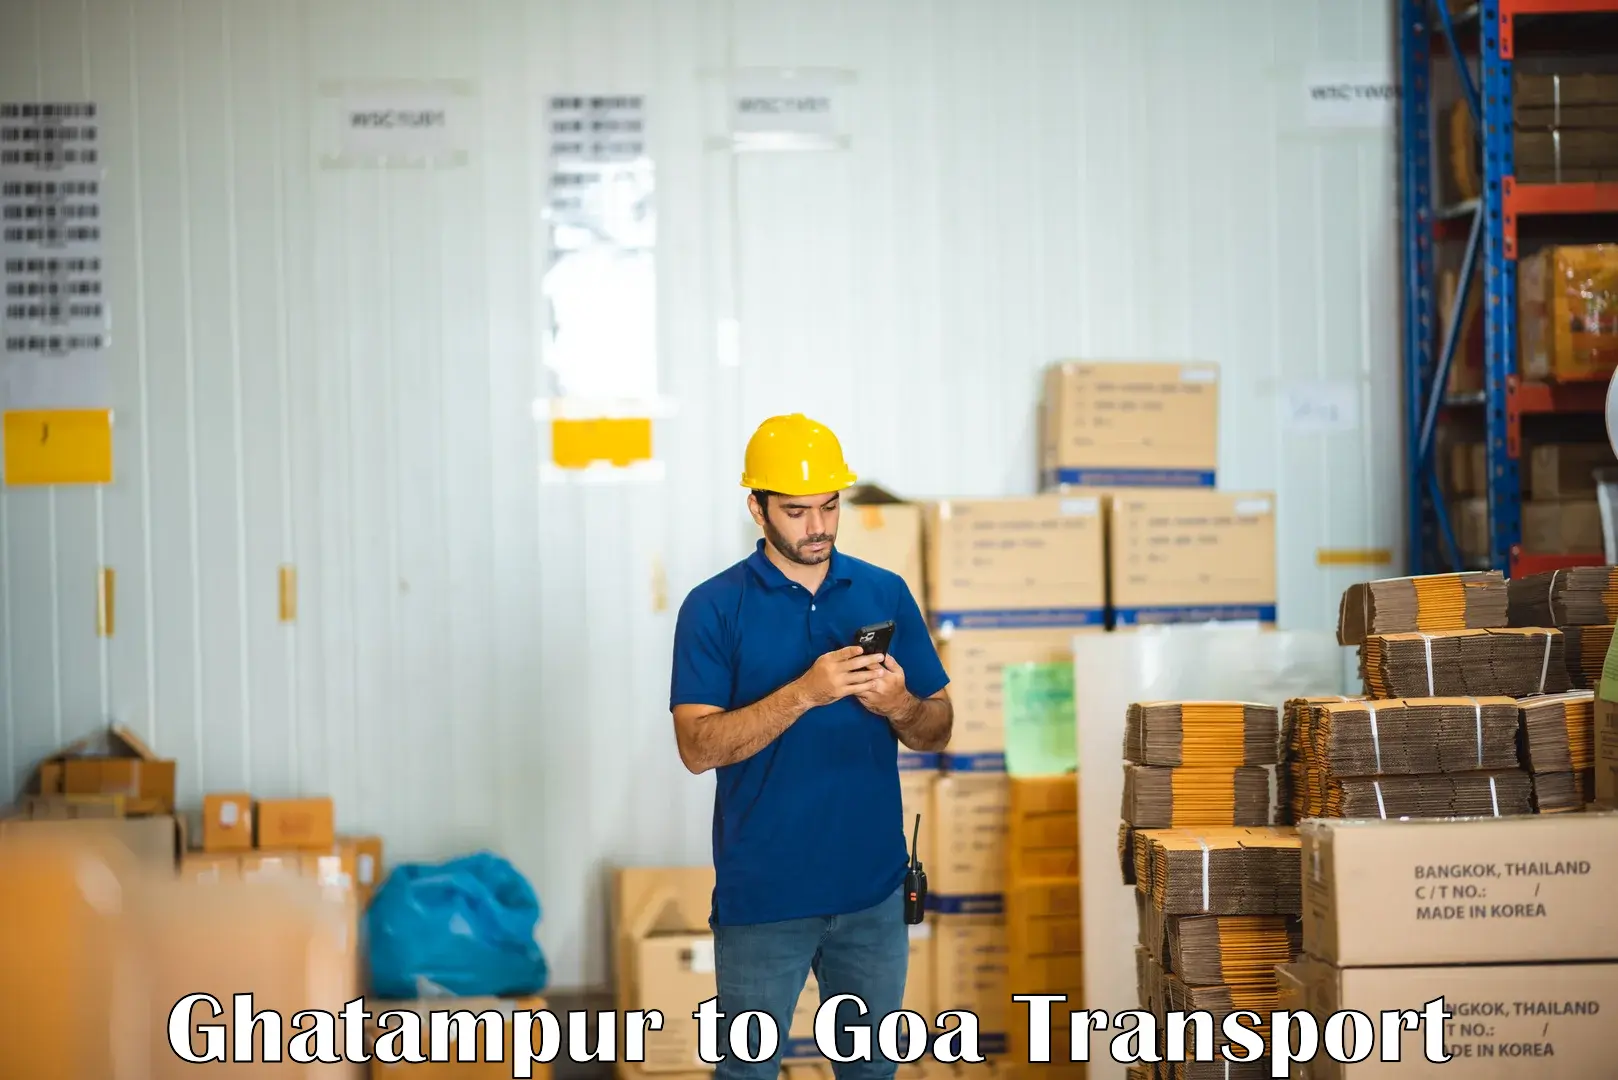 Daily transport service Ghatampur to Goa University